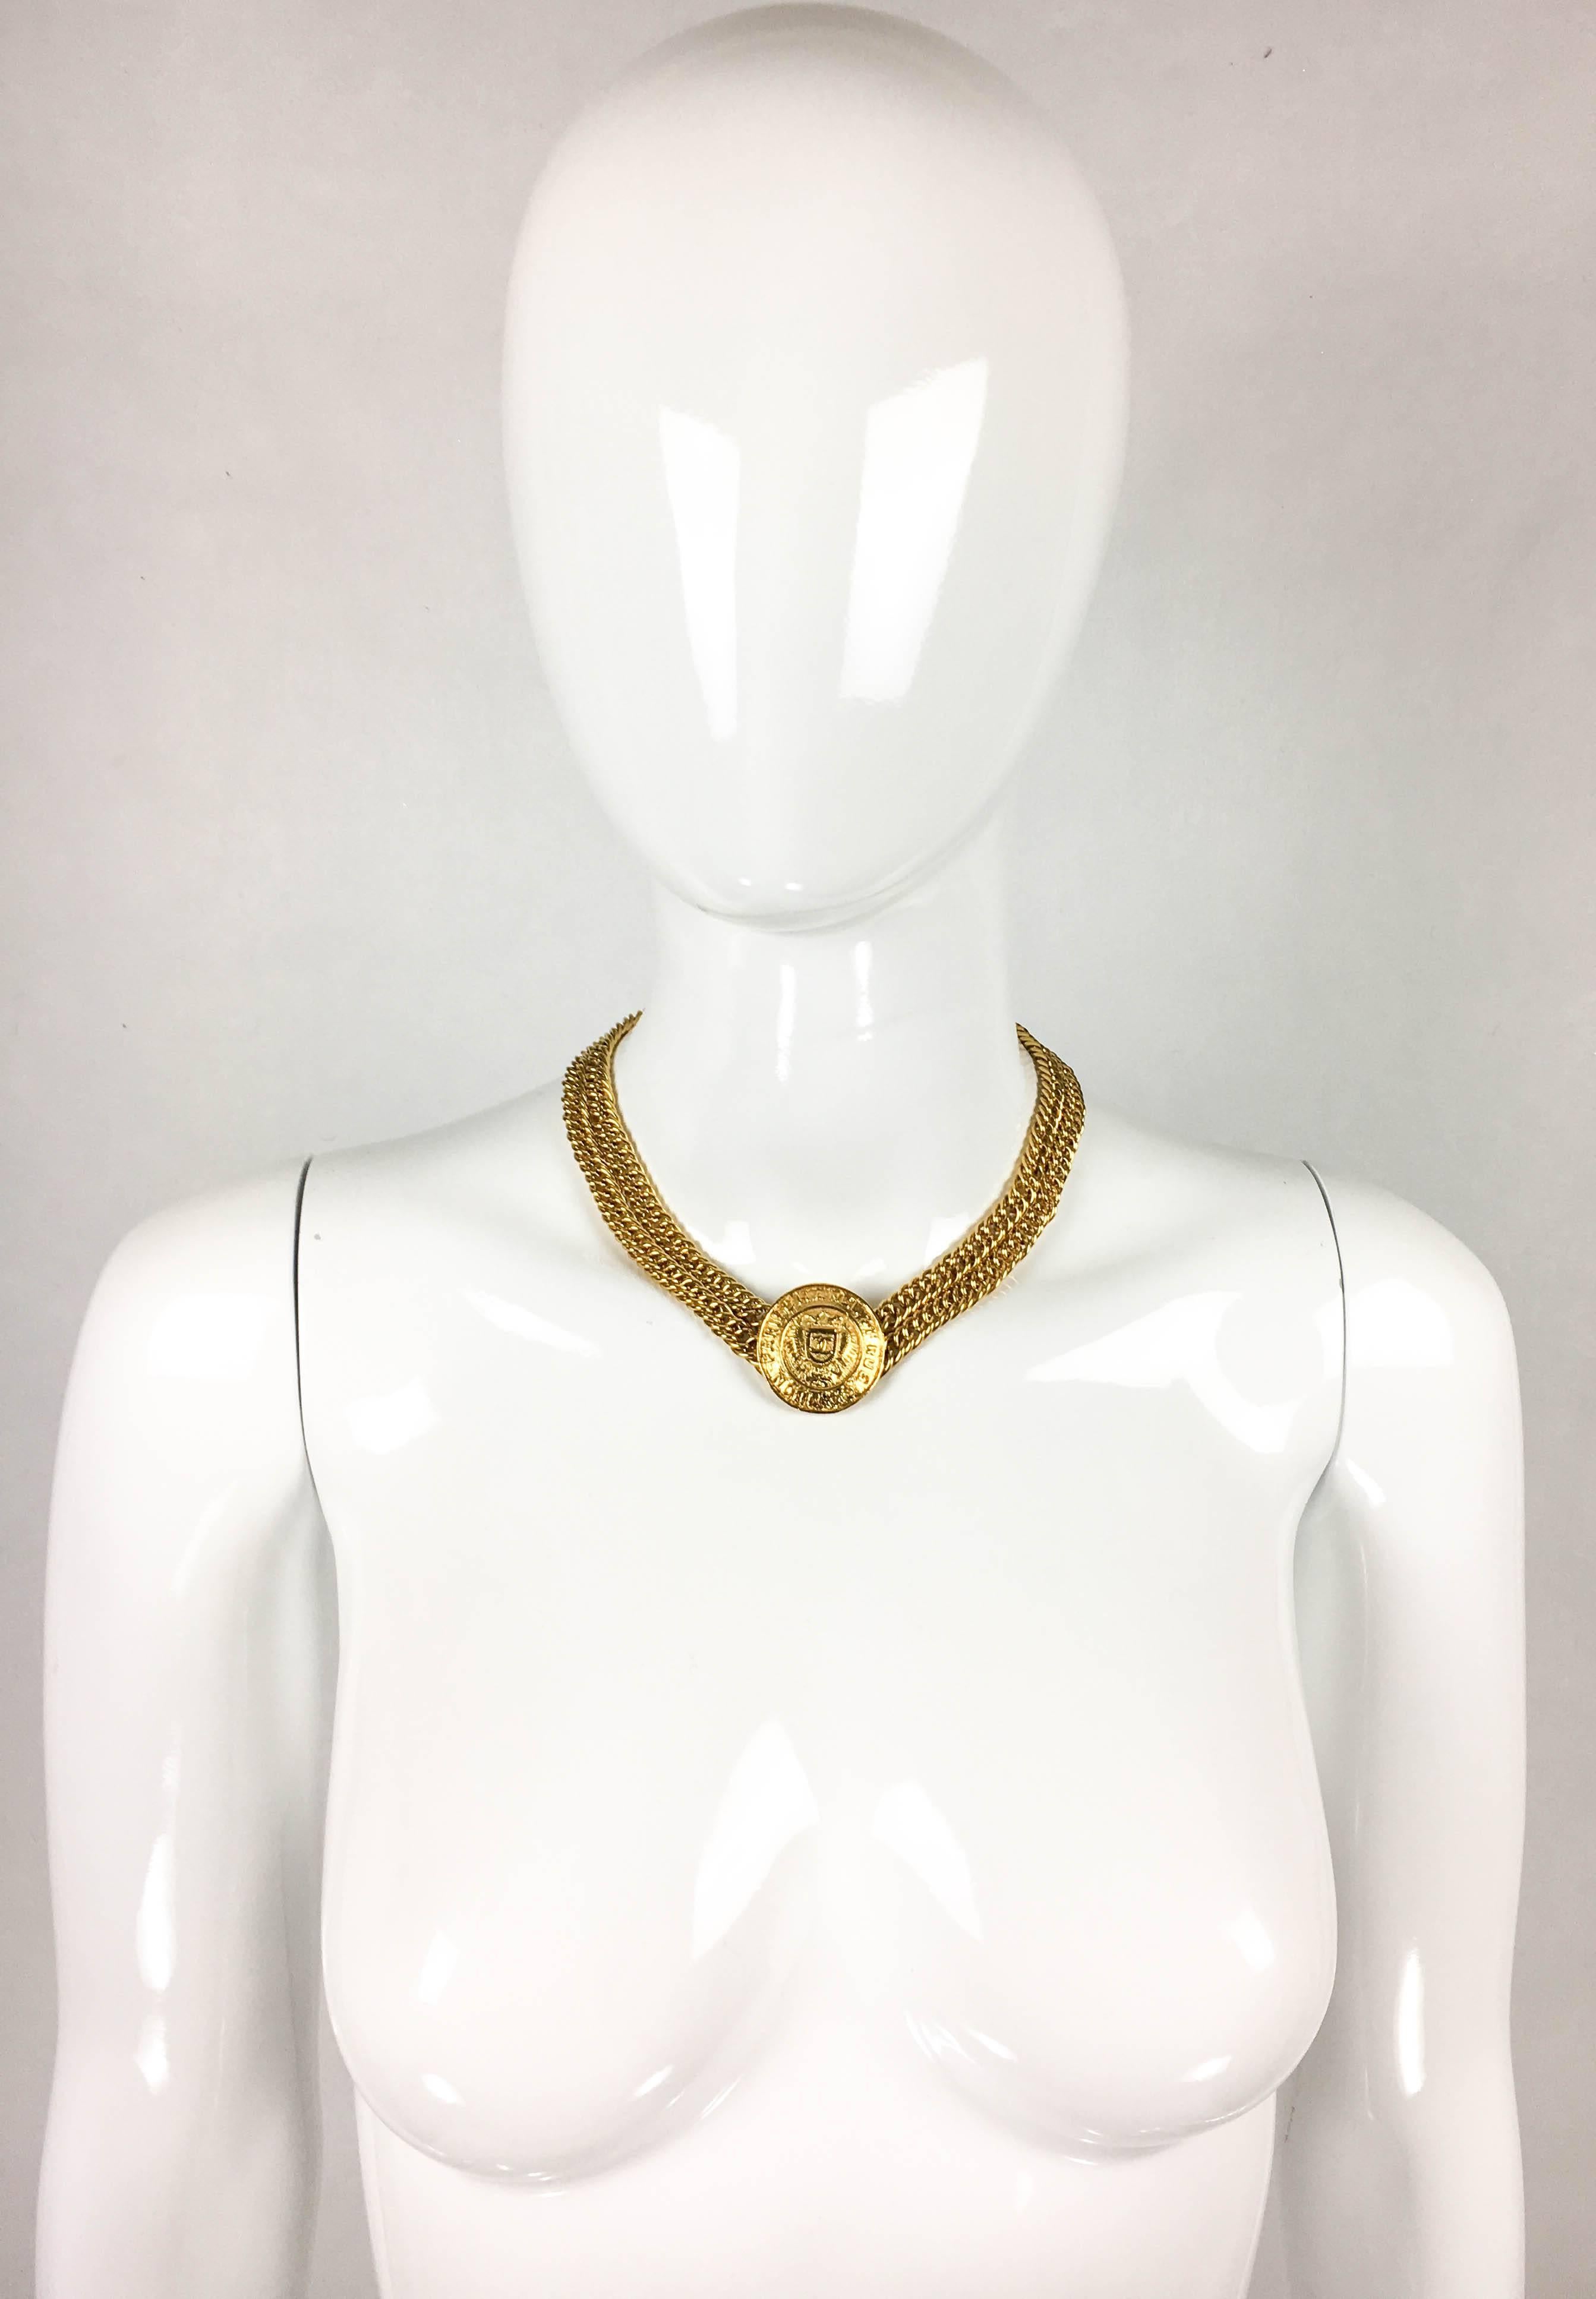 Stylish Vintage Chanel Gold-Tone Medallion Necklace. This beautiful piece by Chanel dates from the early 1990’s. It features a double chain with the coin medallion as a pendant. The medallion resembles hammered gold, and reads ’Chanel 31 Rue Cambon